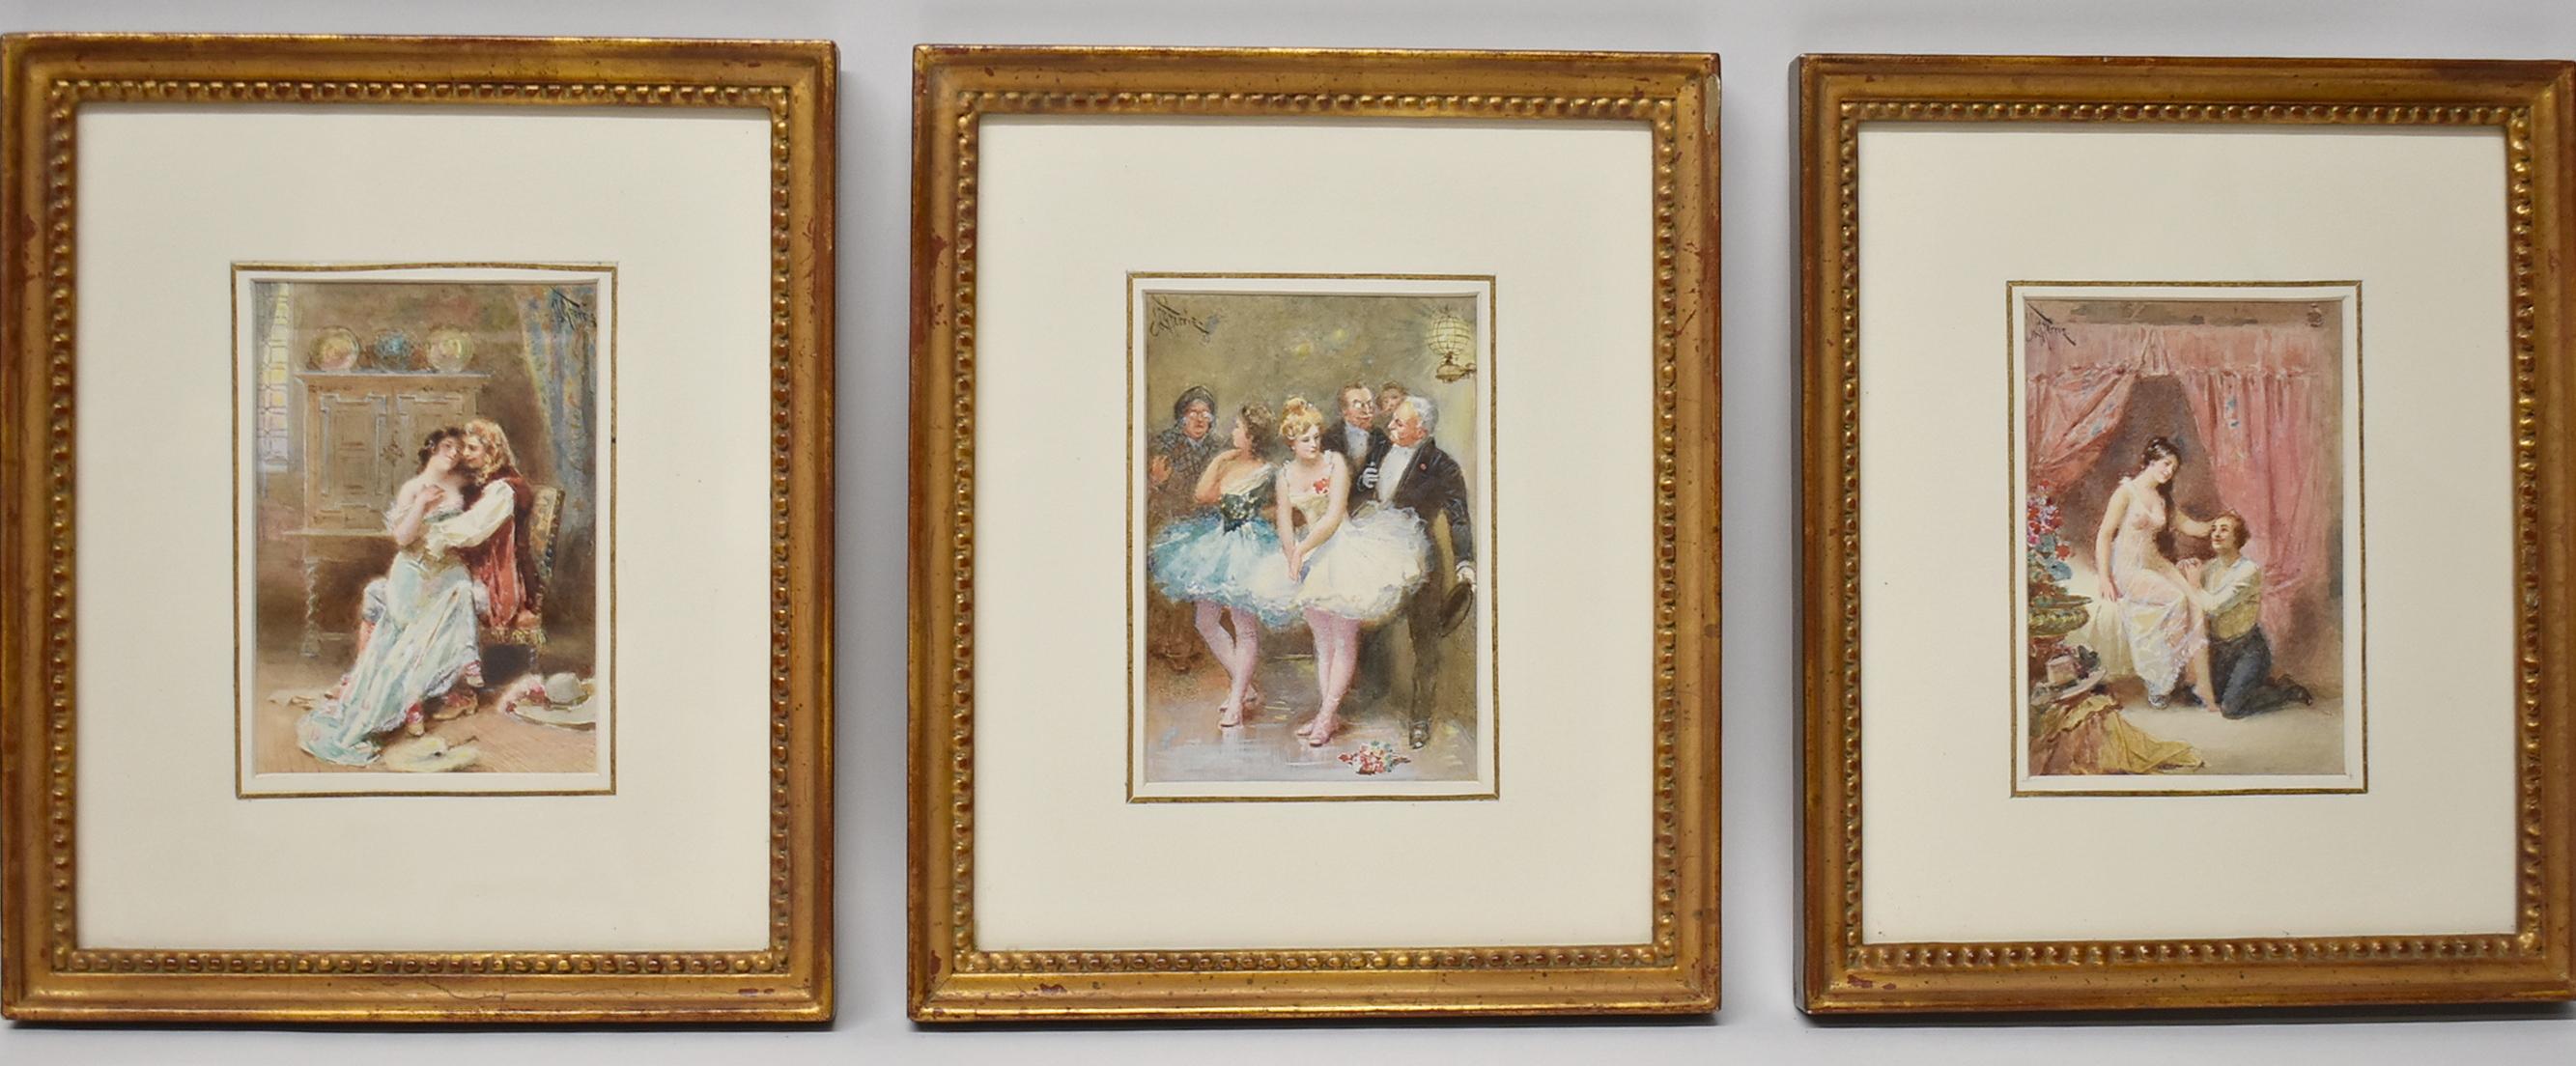 20th Century Jean Leon Gerome Ferris Framed Watercolor Painting, Ballerinas with Gentlemen For Sale